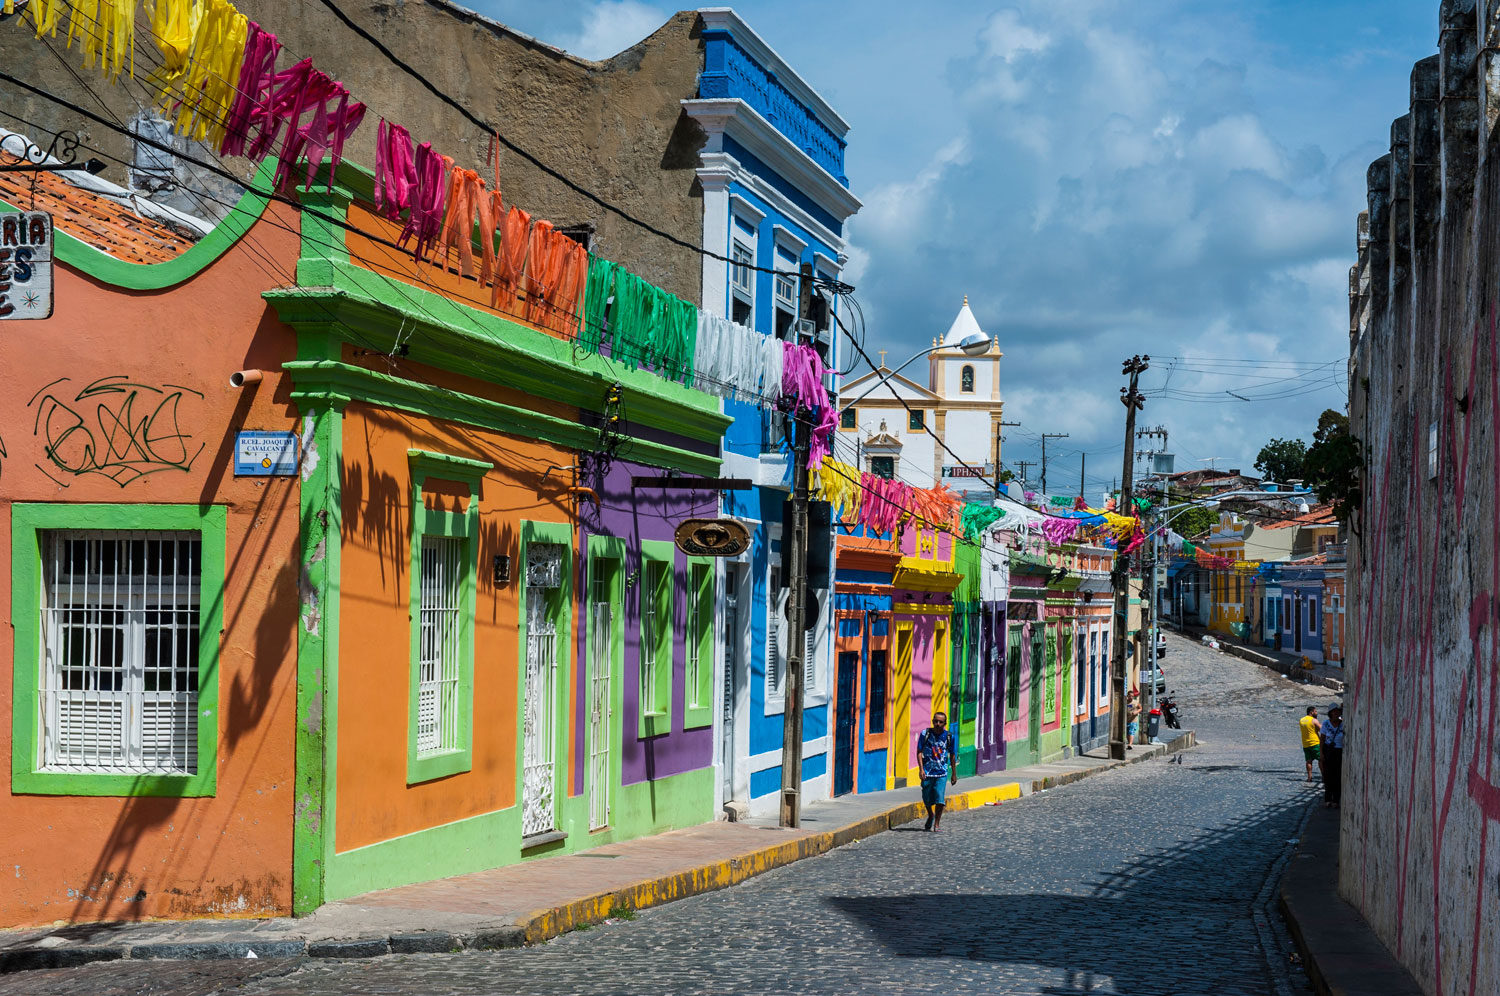 Visitors can take a trip through history in Olinda, a colonial town where centuries-old churches and traditional, colorful homes still stand on a beautiful Atlantic coast.